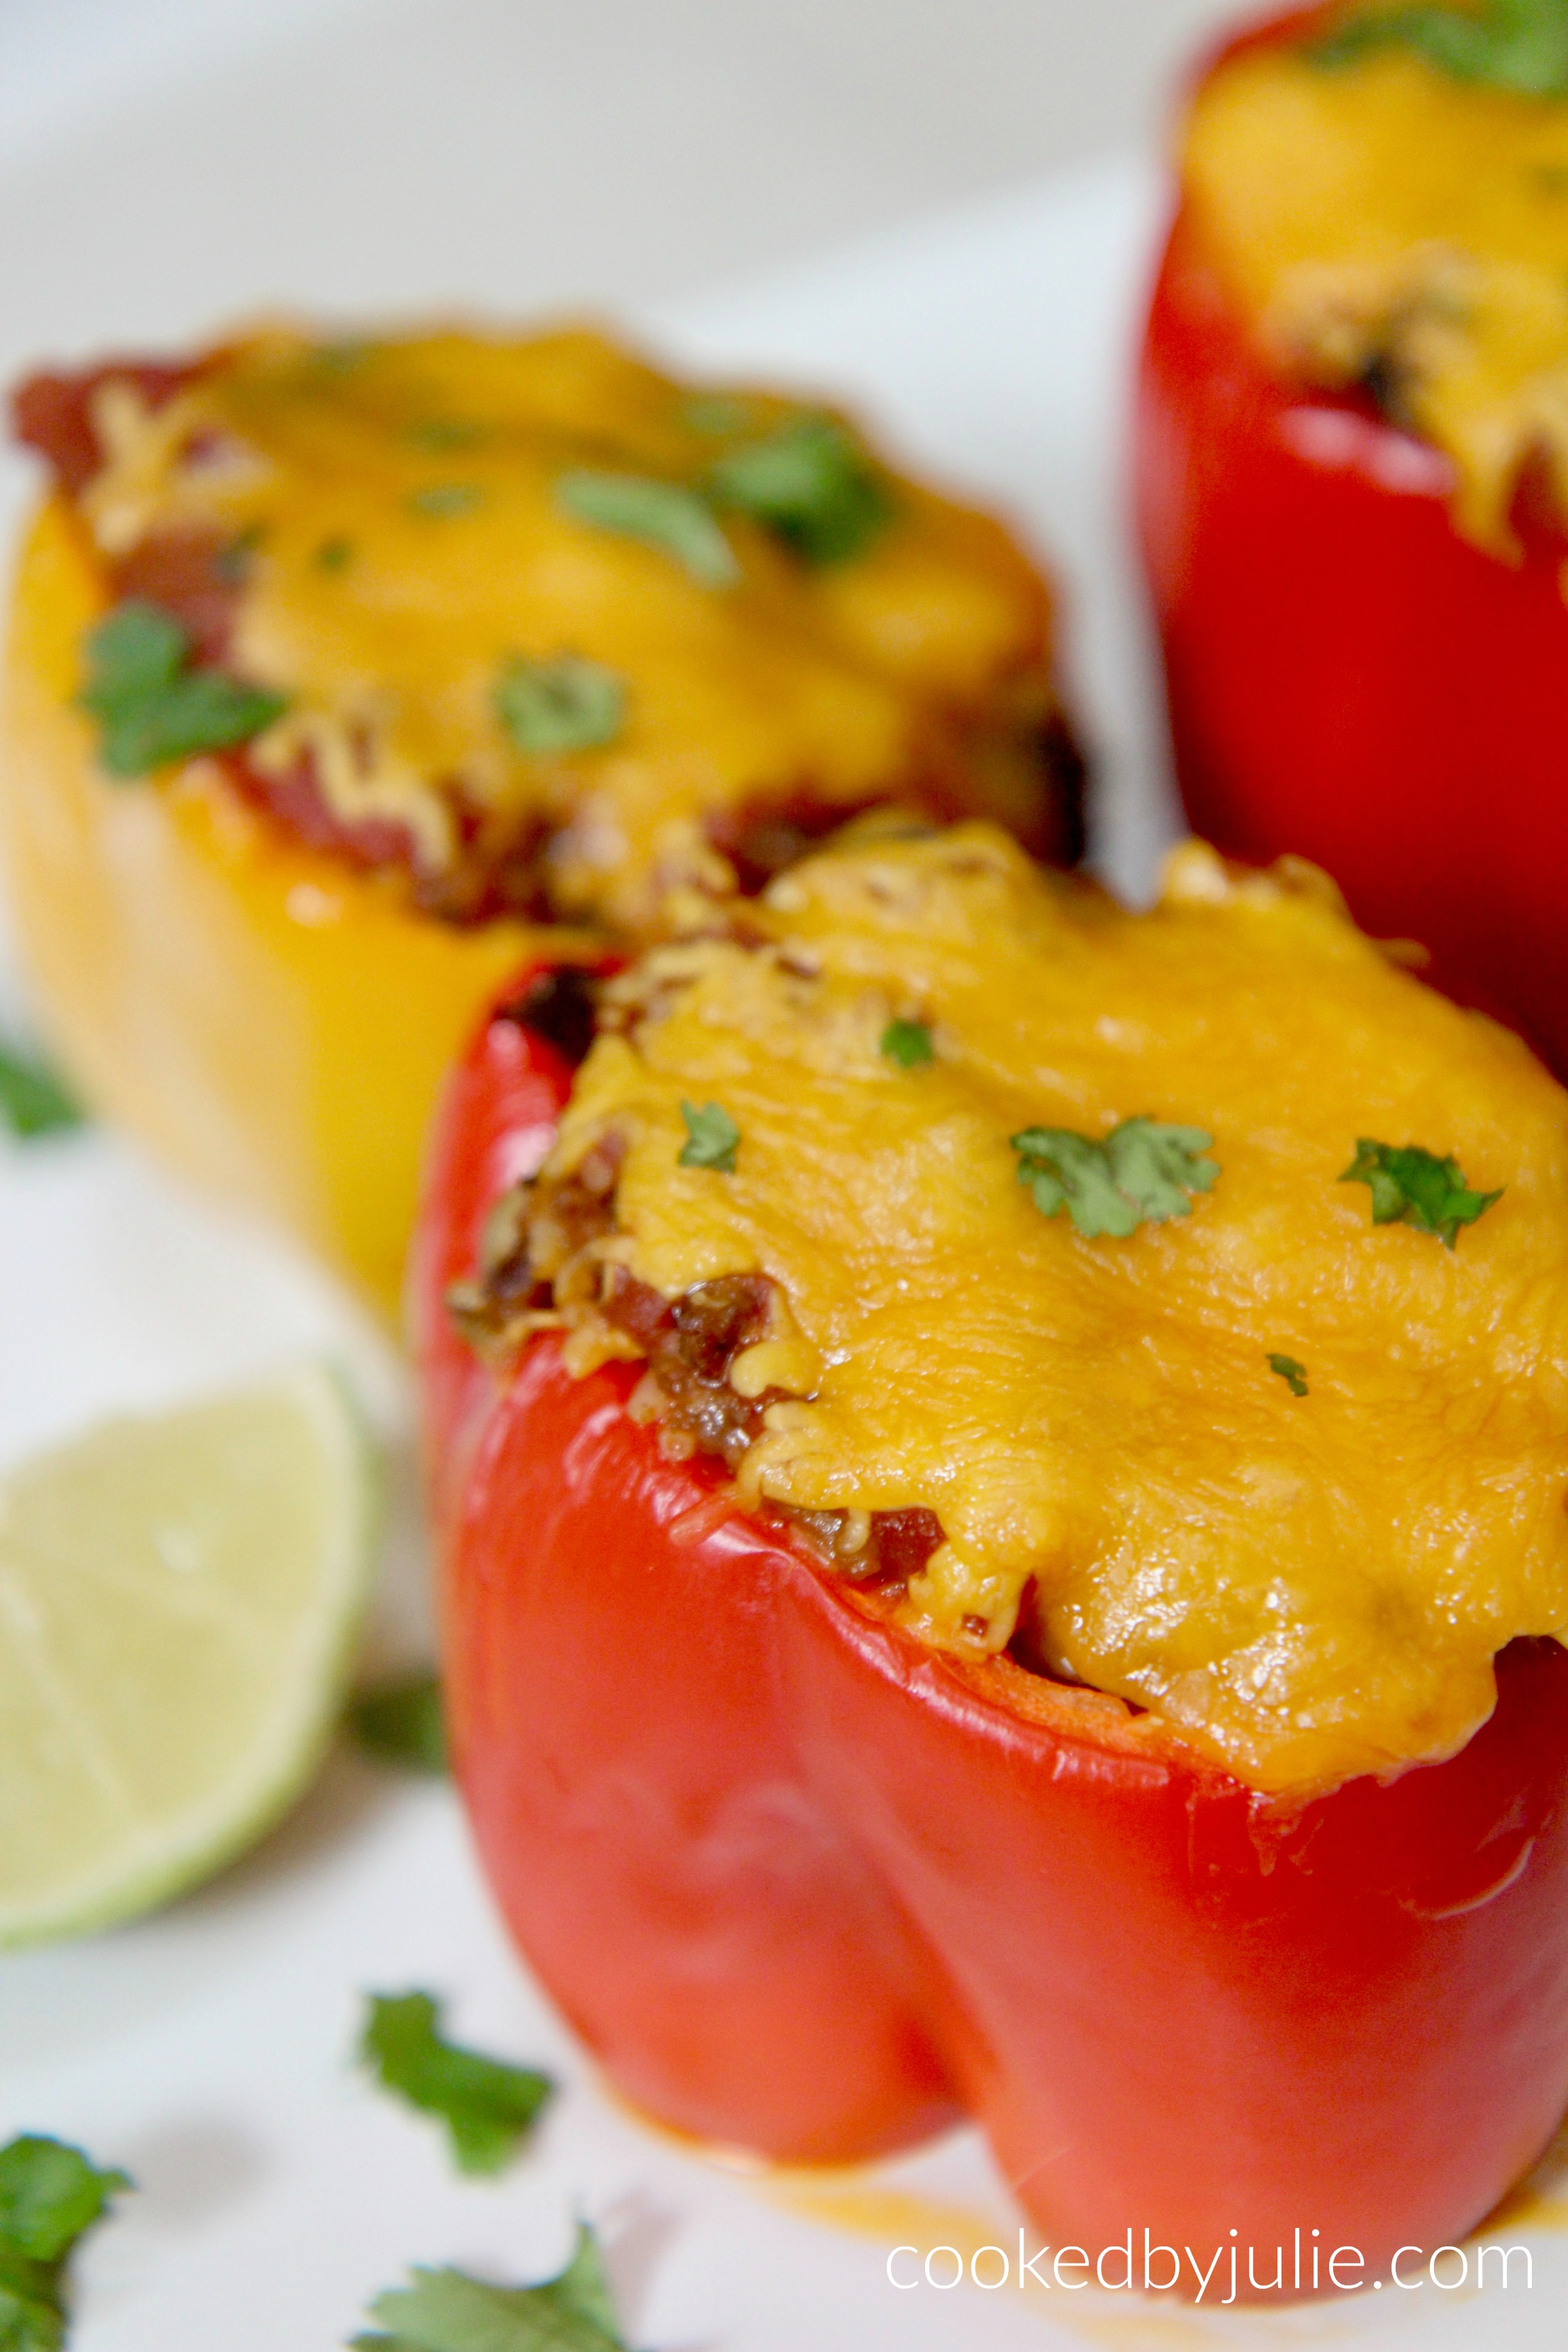 These taco stuffed peppers are a super easy, cheesy, and delicious weeknight dinner